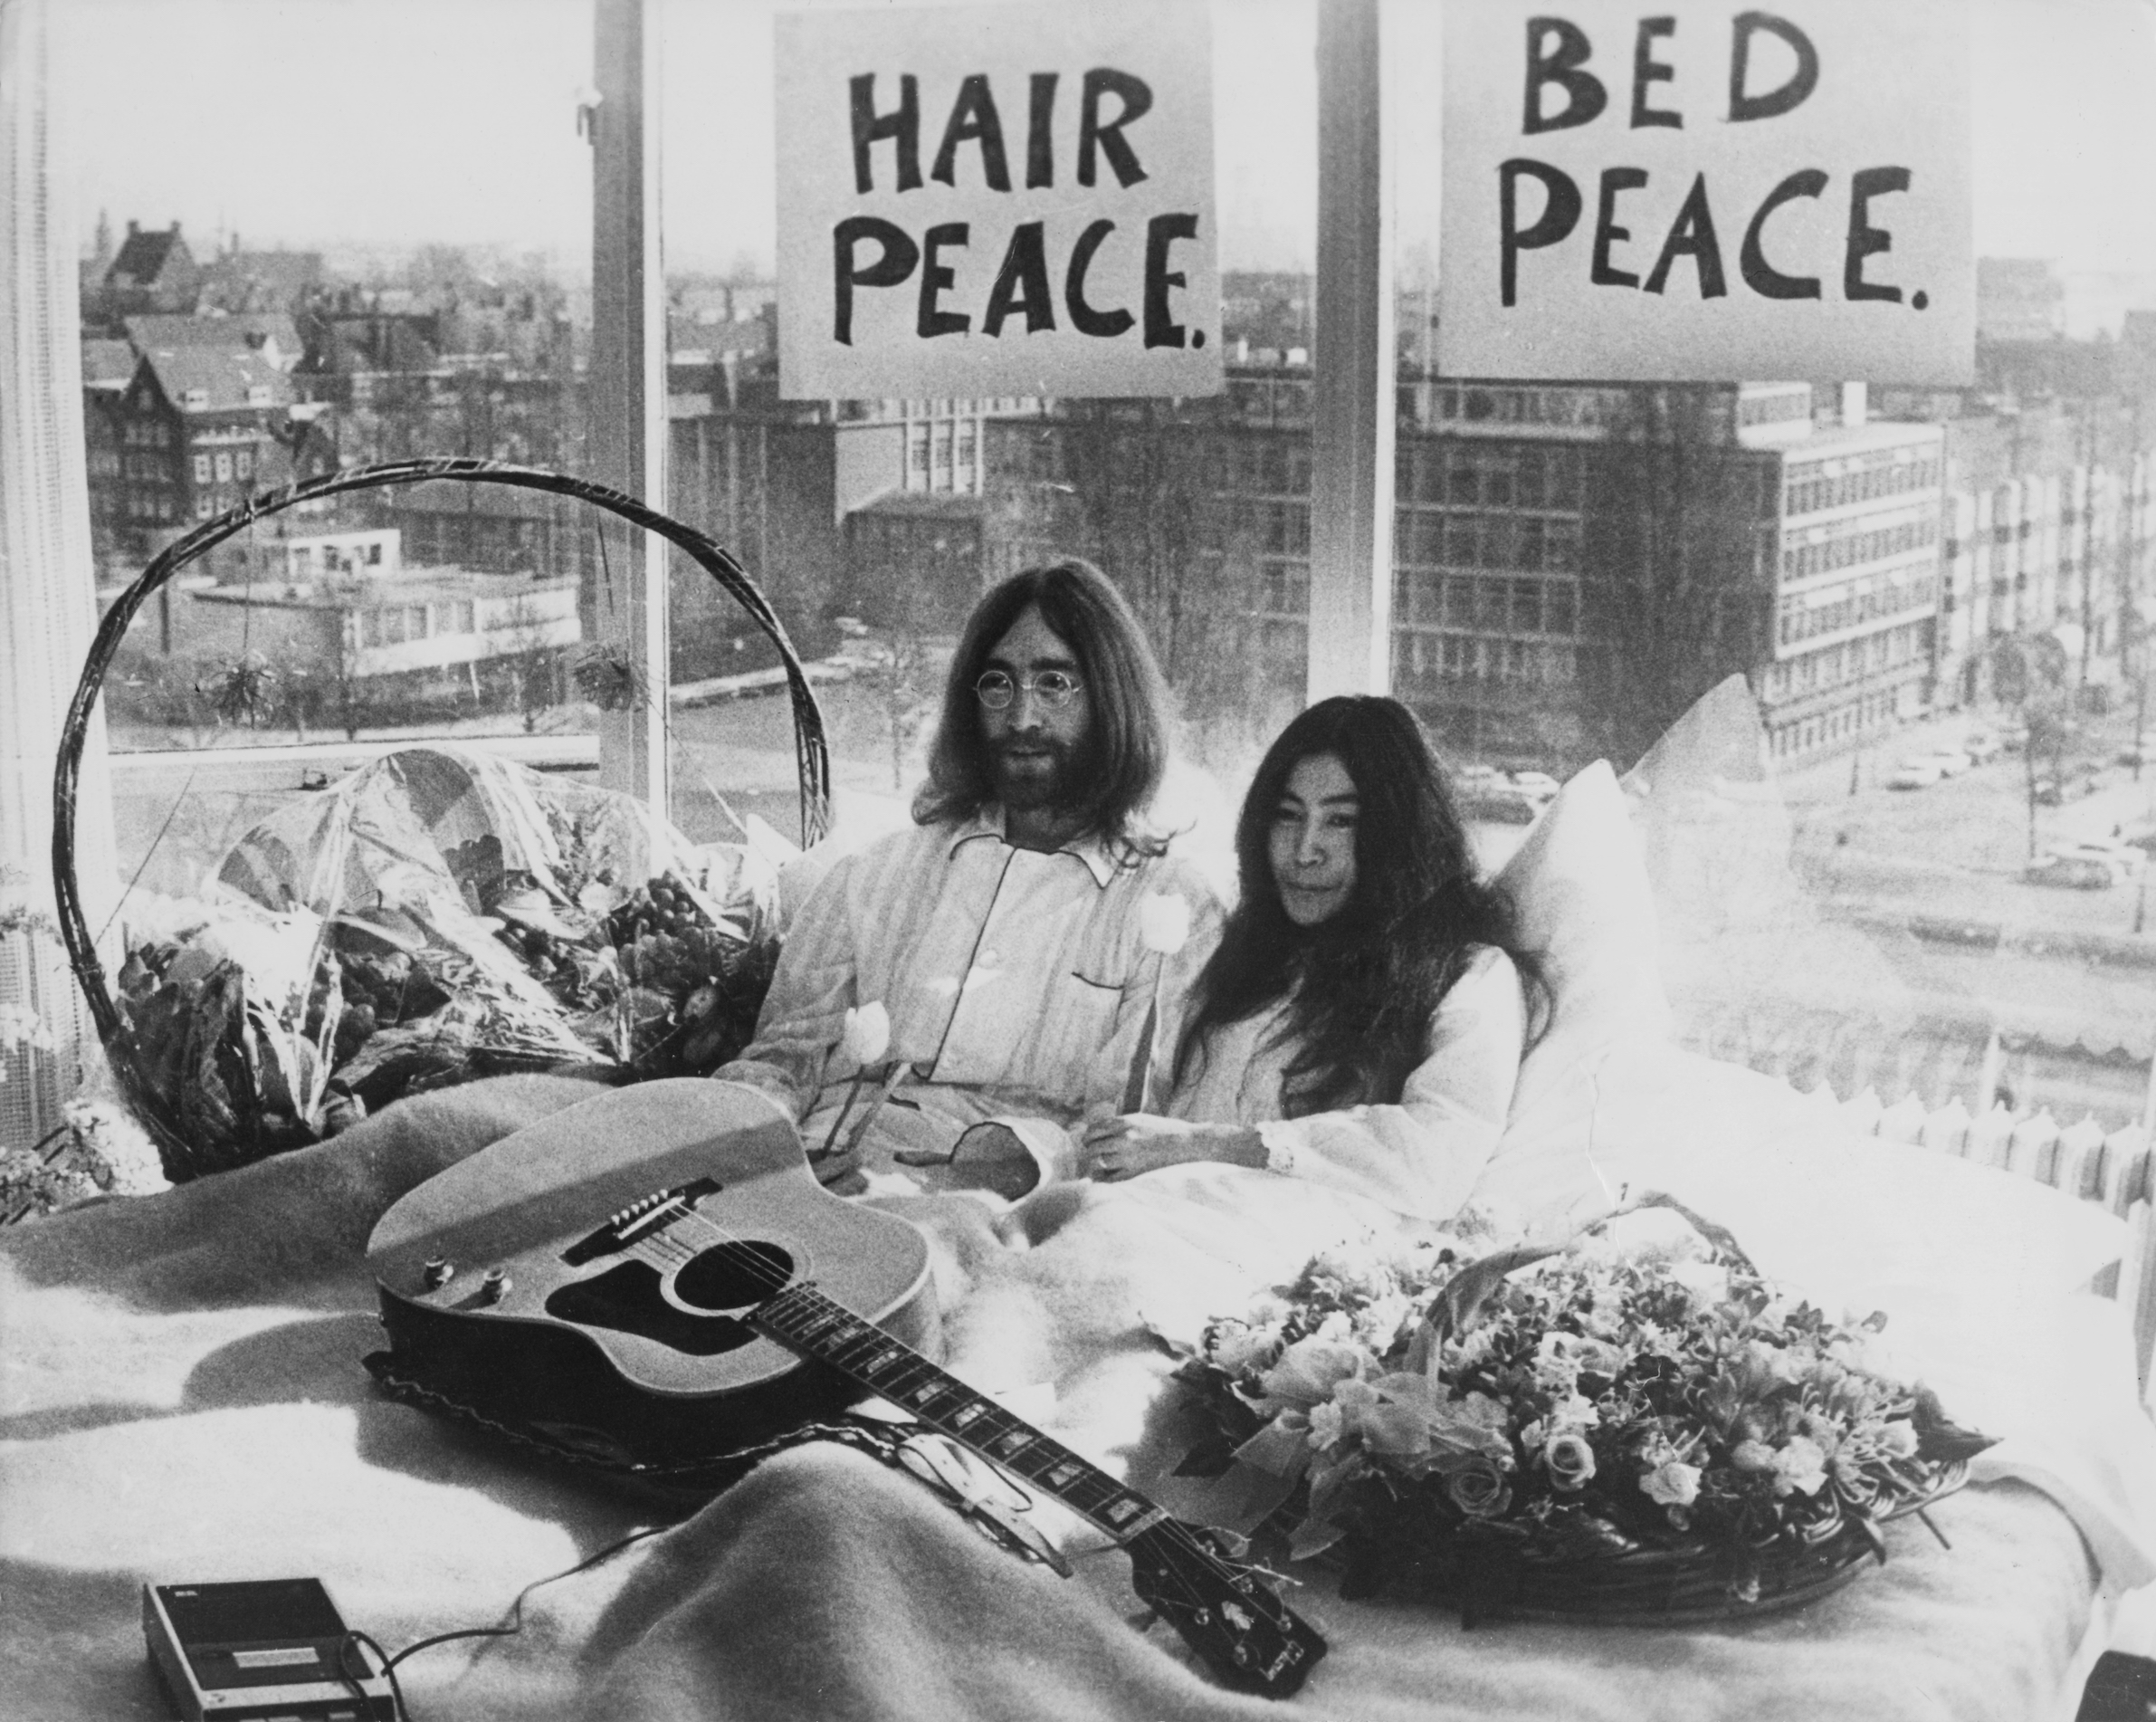 John Lennon and Yoko Ono at their 'bed-in' for peace in Amsterdam